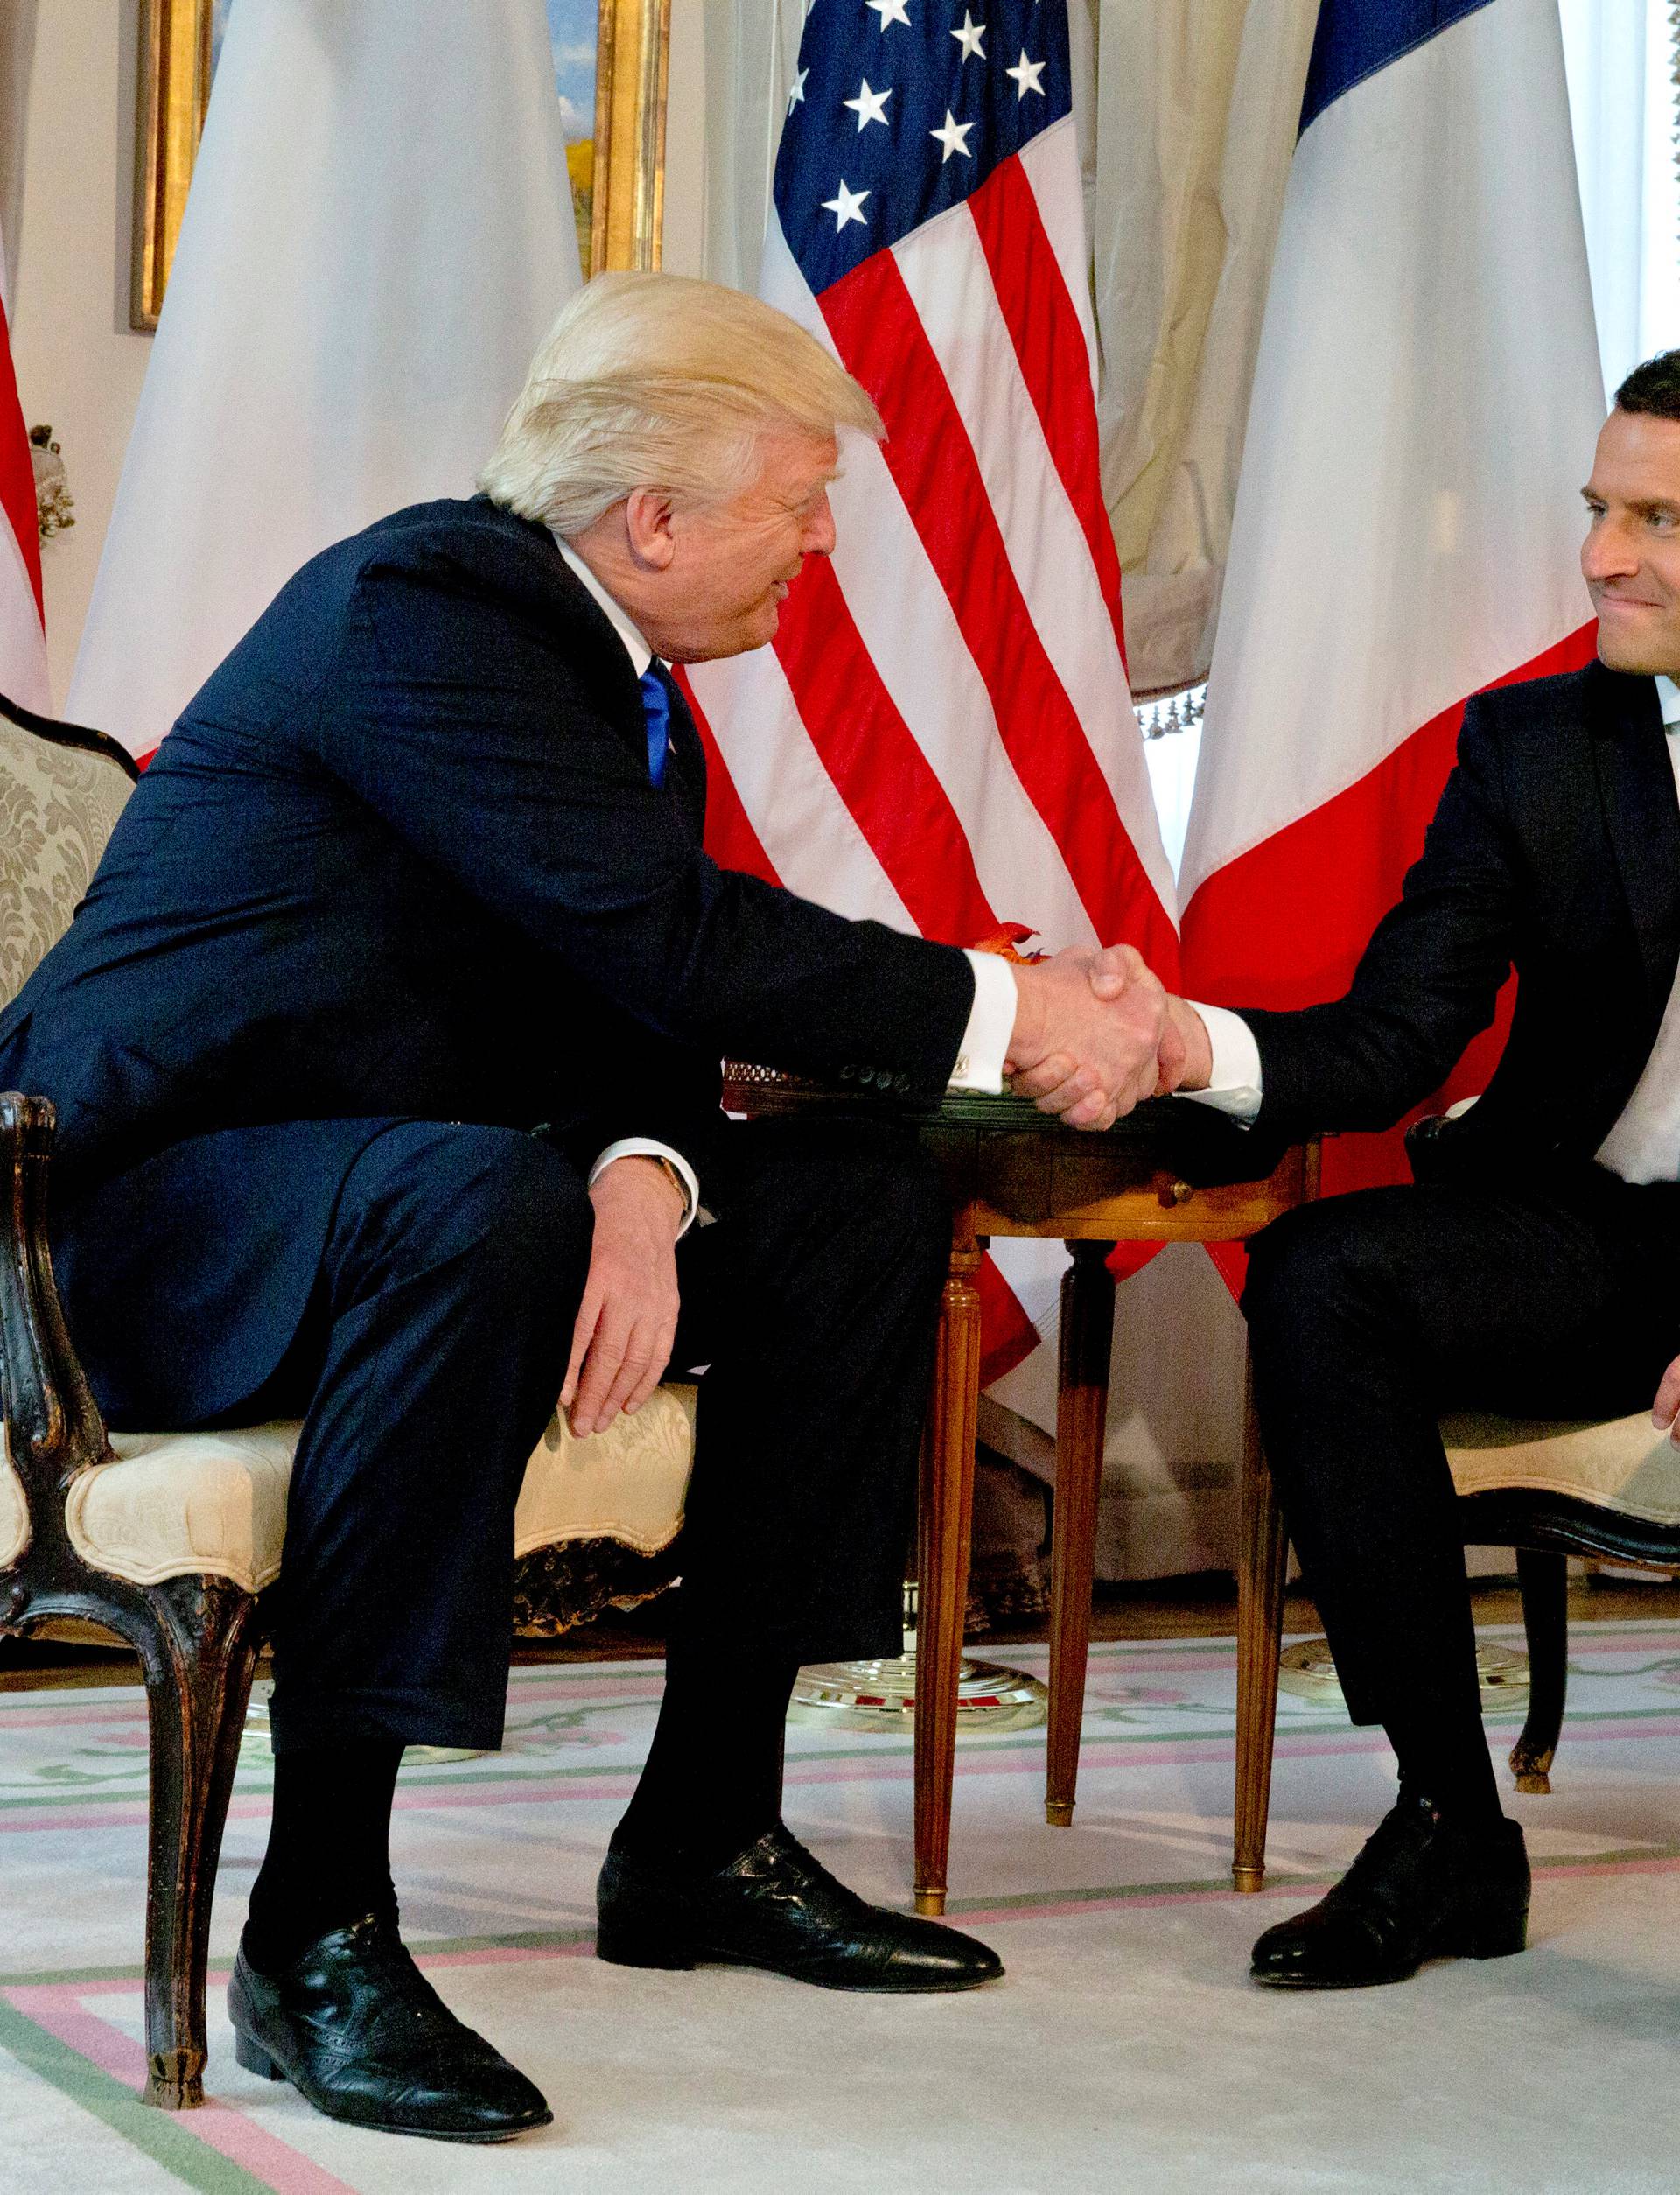 U.S. President Donald Trump meets French President Emmanuel Macron before a working lunch ahead of a NATO Summit in Brussels